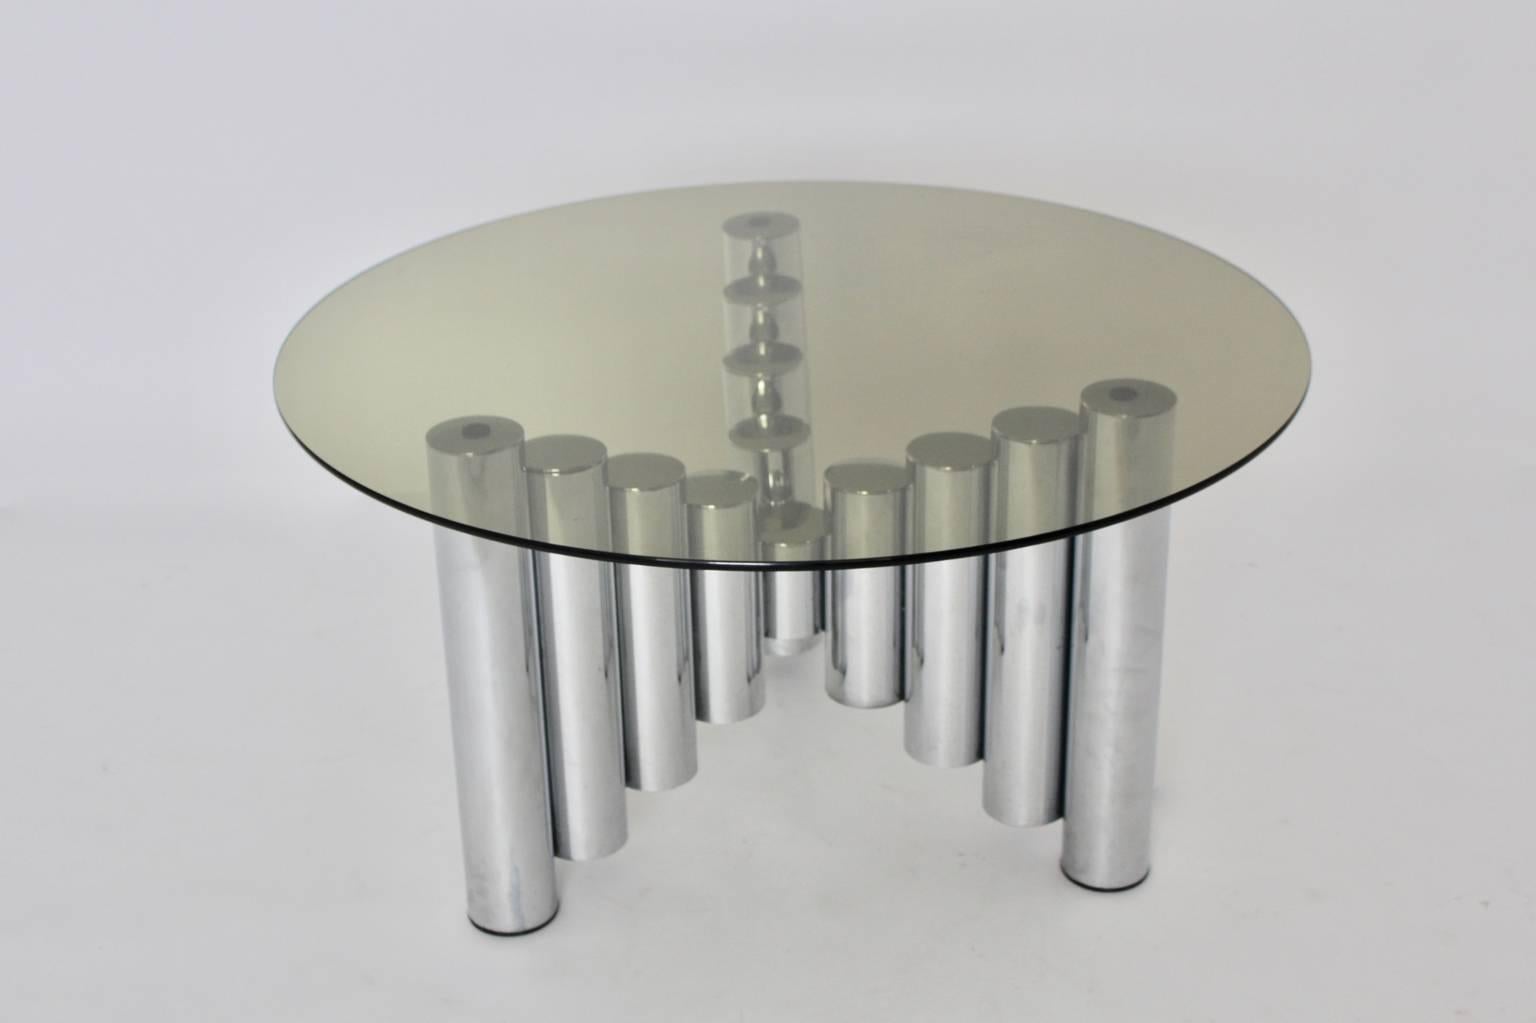 This chromed tube steel base shows 13 tubes.
On the top is a greenish round glass plate.
The coffee table was designed and made in the 1960s.
Very good condition with some signs of age and use.

approx. measures
Diameter: 89.5 cm - Height: 47